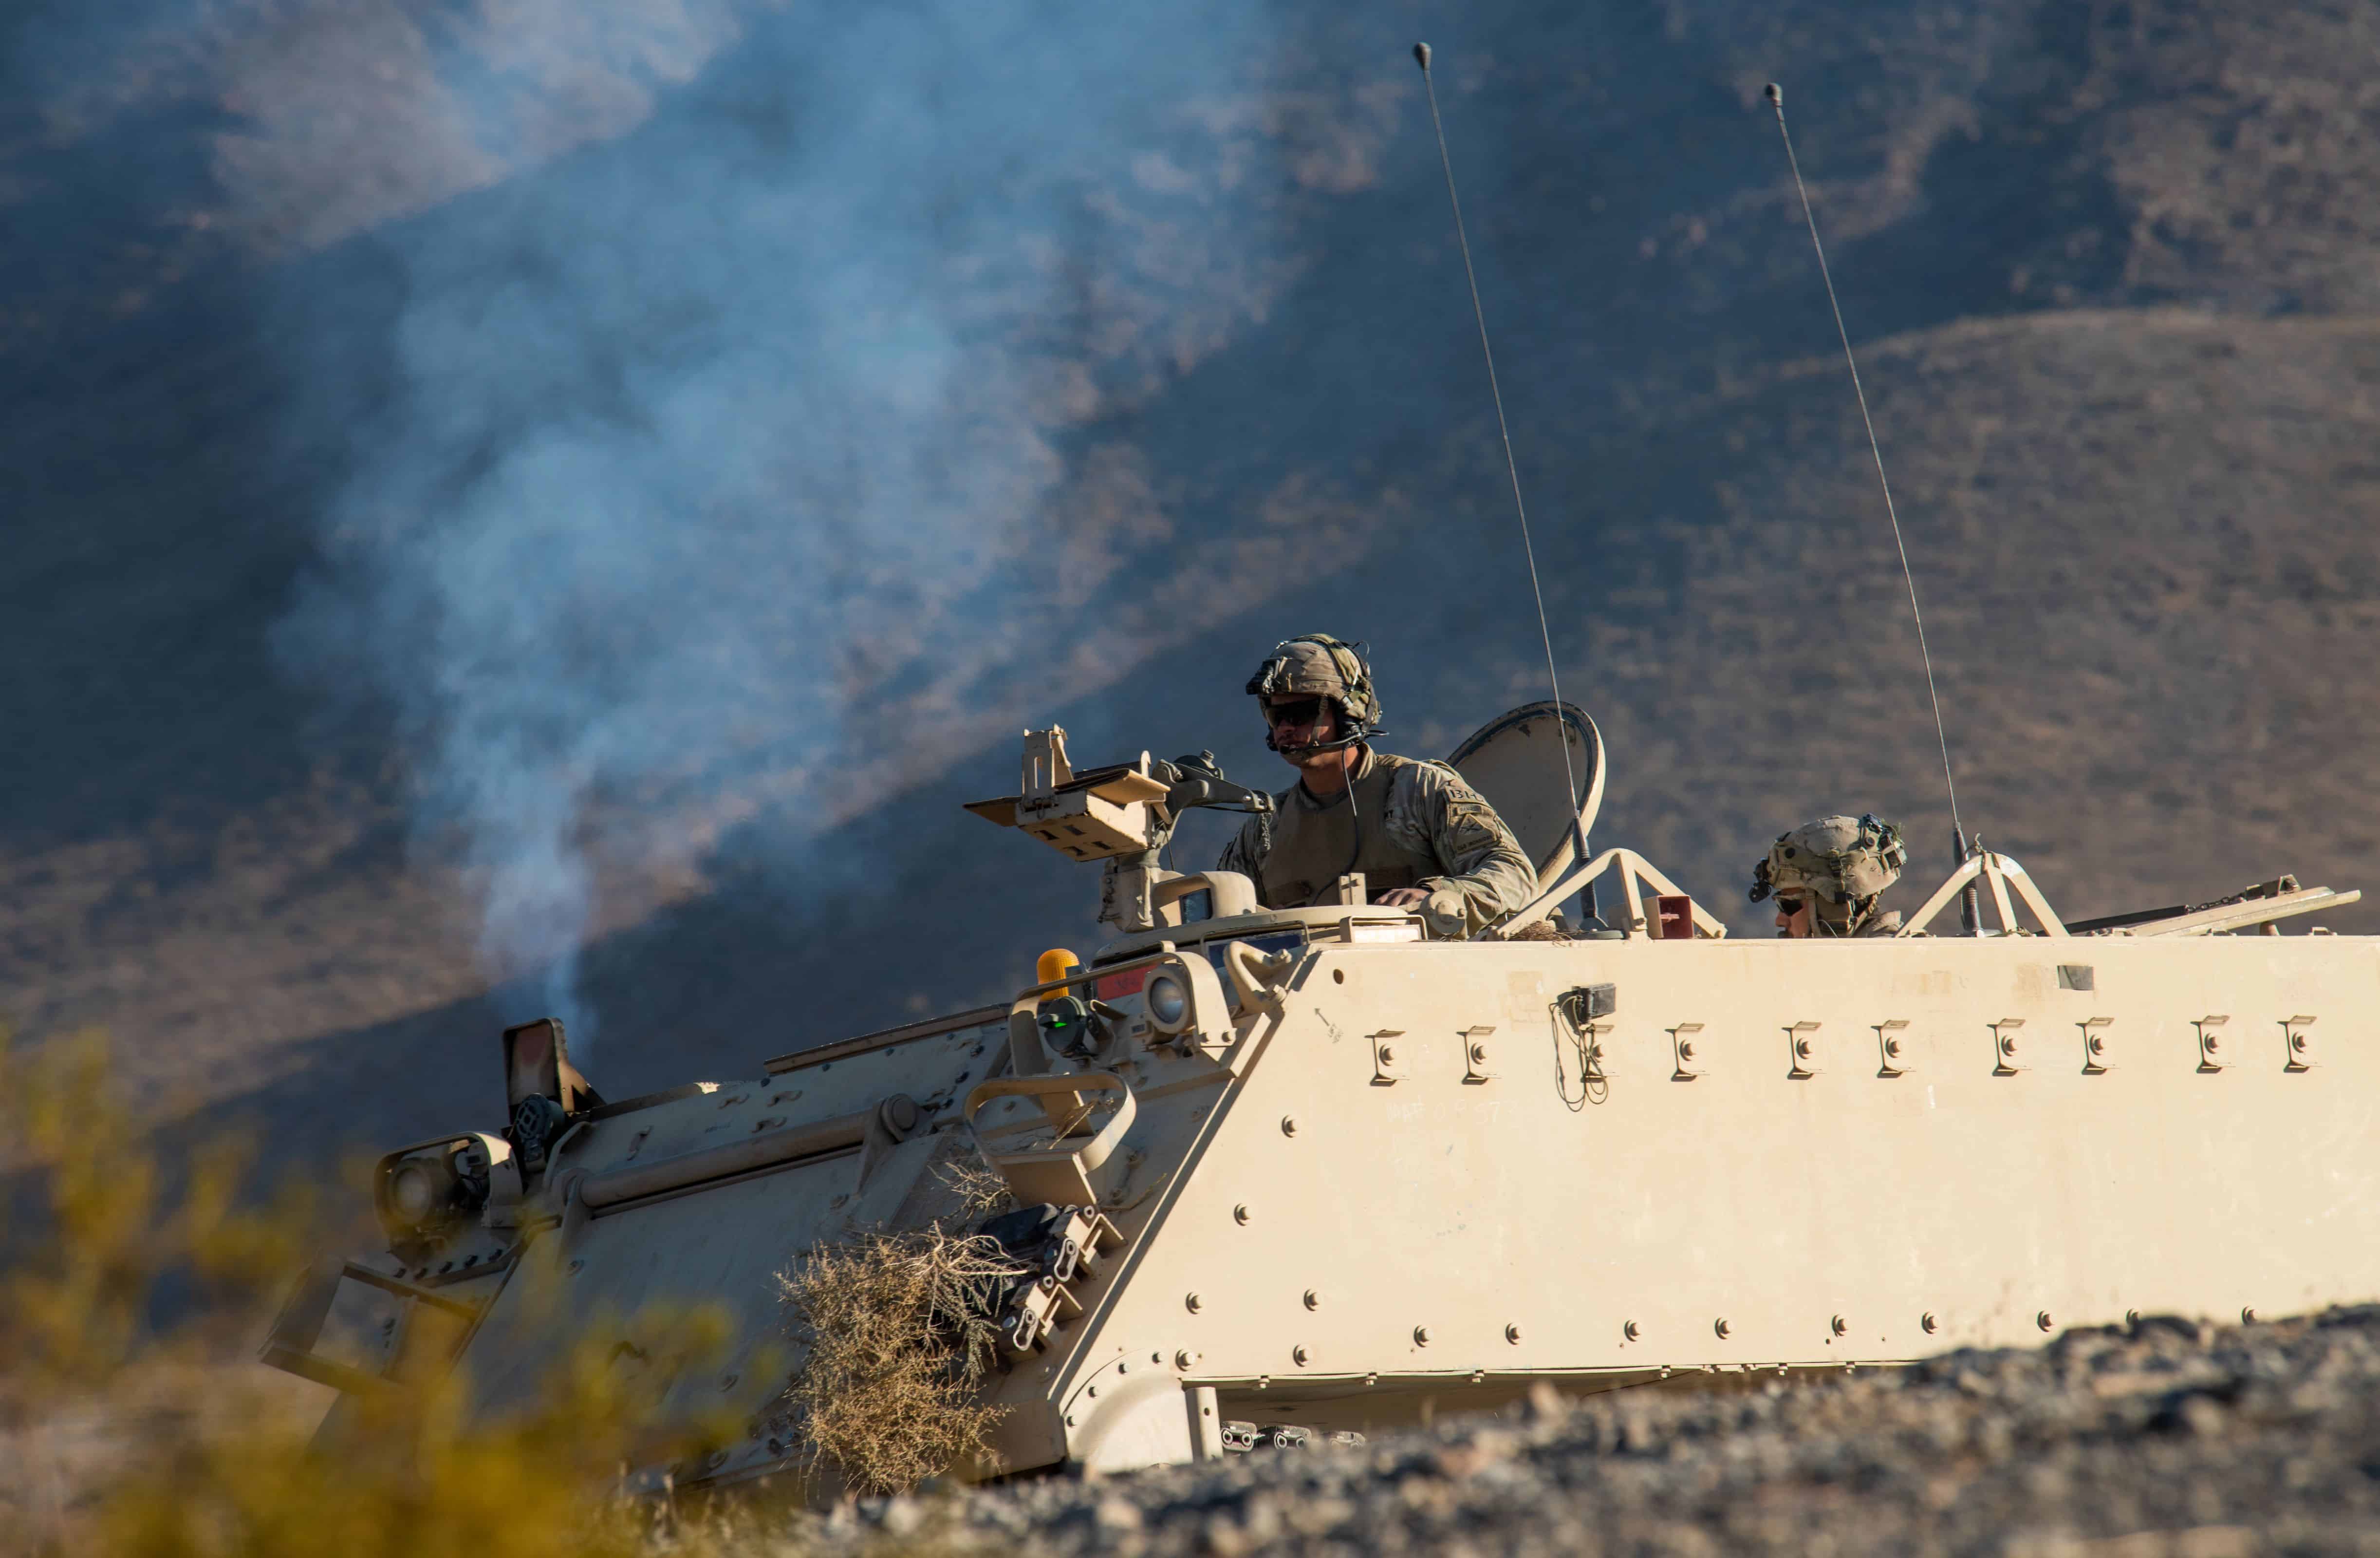 U.S. Army Soldiers assigned to the 3rd Brigade Combat Team, 1st Armored Division at Fort Bliss, Texas, ride in an Armored Personnel Carrier during a Green Flag West 21-02 exercise, at Fort Irwin Army Base, California, Nov. 13, 2020. Green Flag-West is a realistic air-land integration combat training exercise involving the air forces of the United States and its allies. It focuses on integration and presents joint force commanders real-time battle scenarios to solve while facing opposition forces. (U.S. Air Force photo by Airman 1st Class Dwane R. Young)